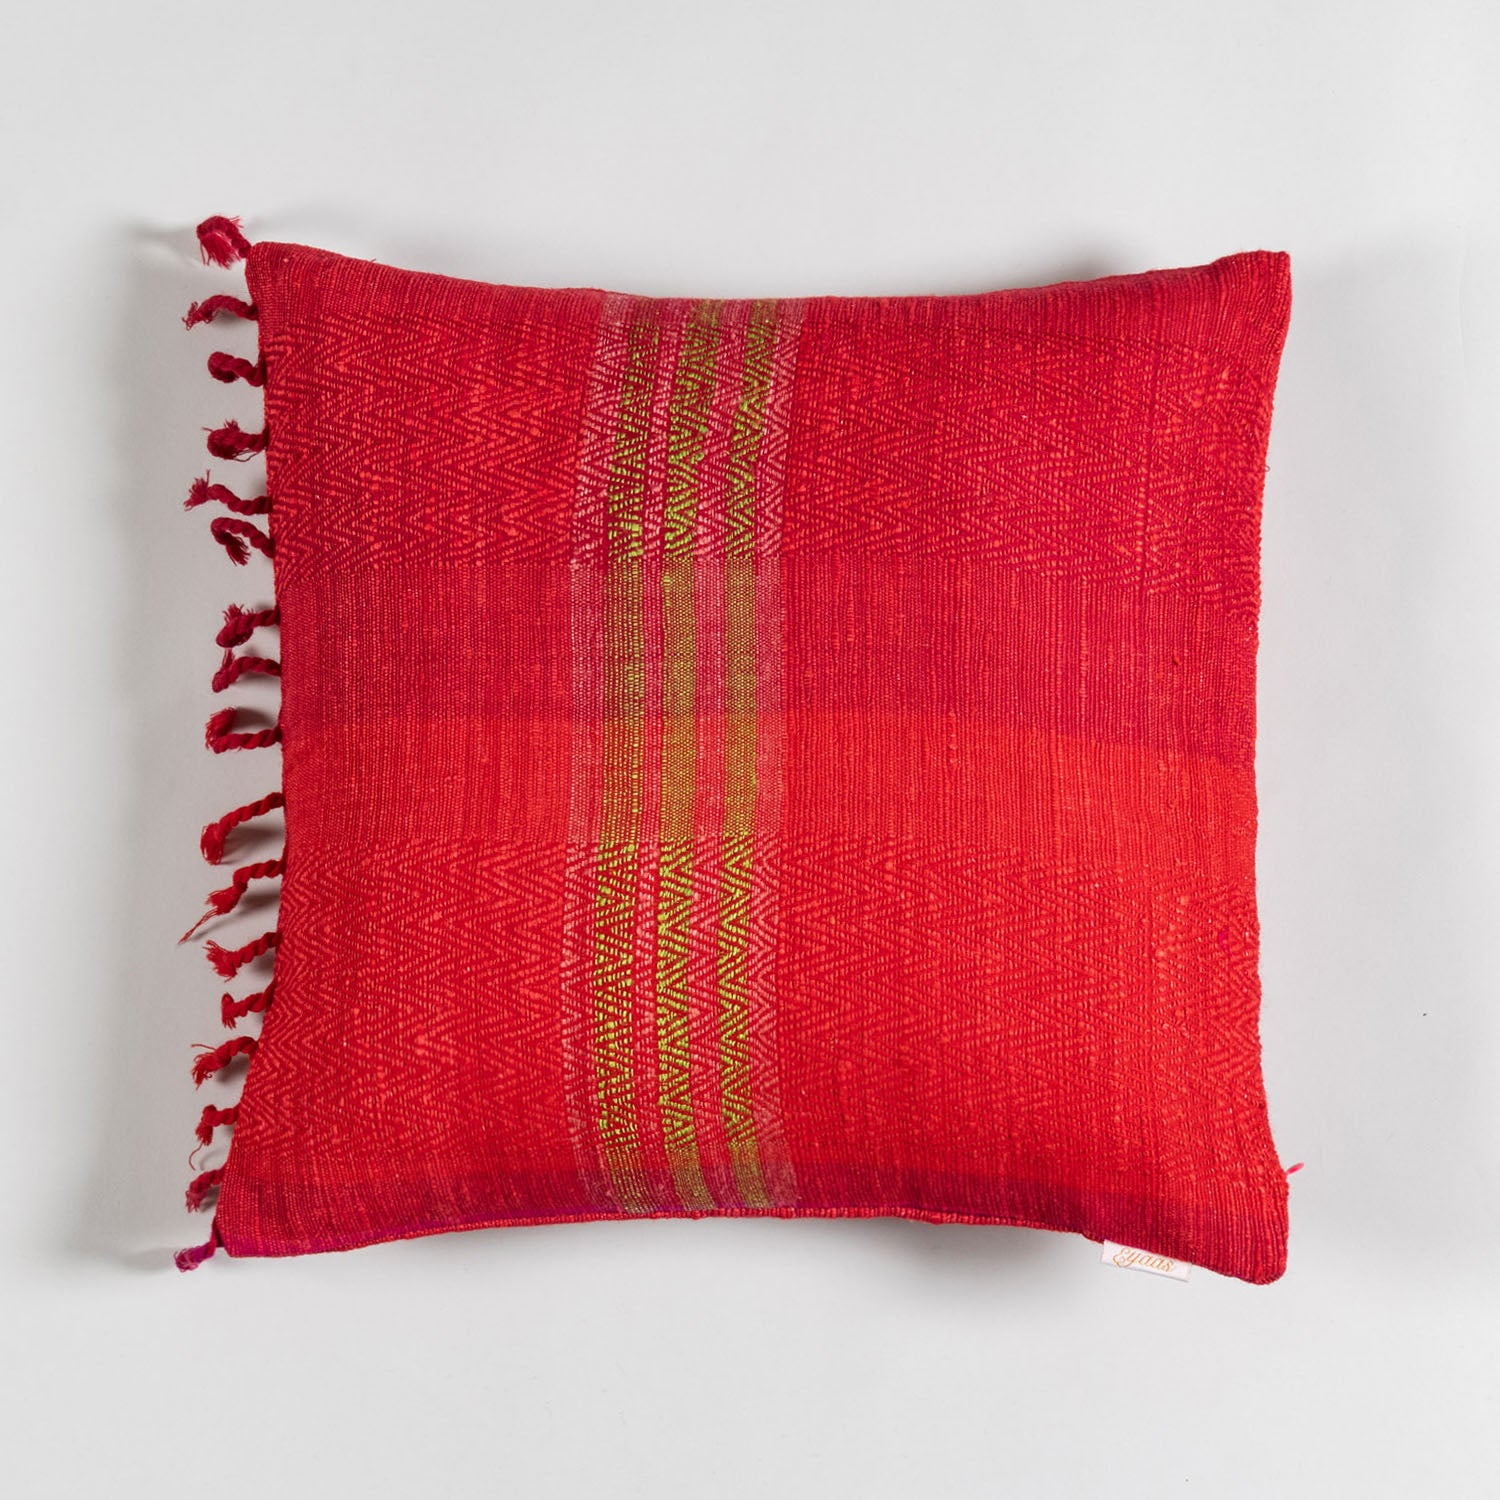 Handwoven Upcycled Red Wool & Oak Silk Cushion Cover - 16x16